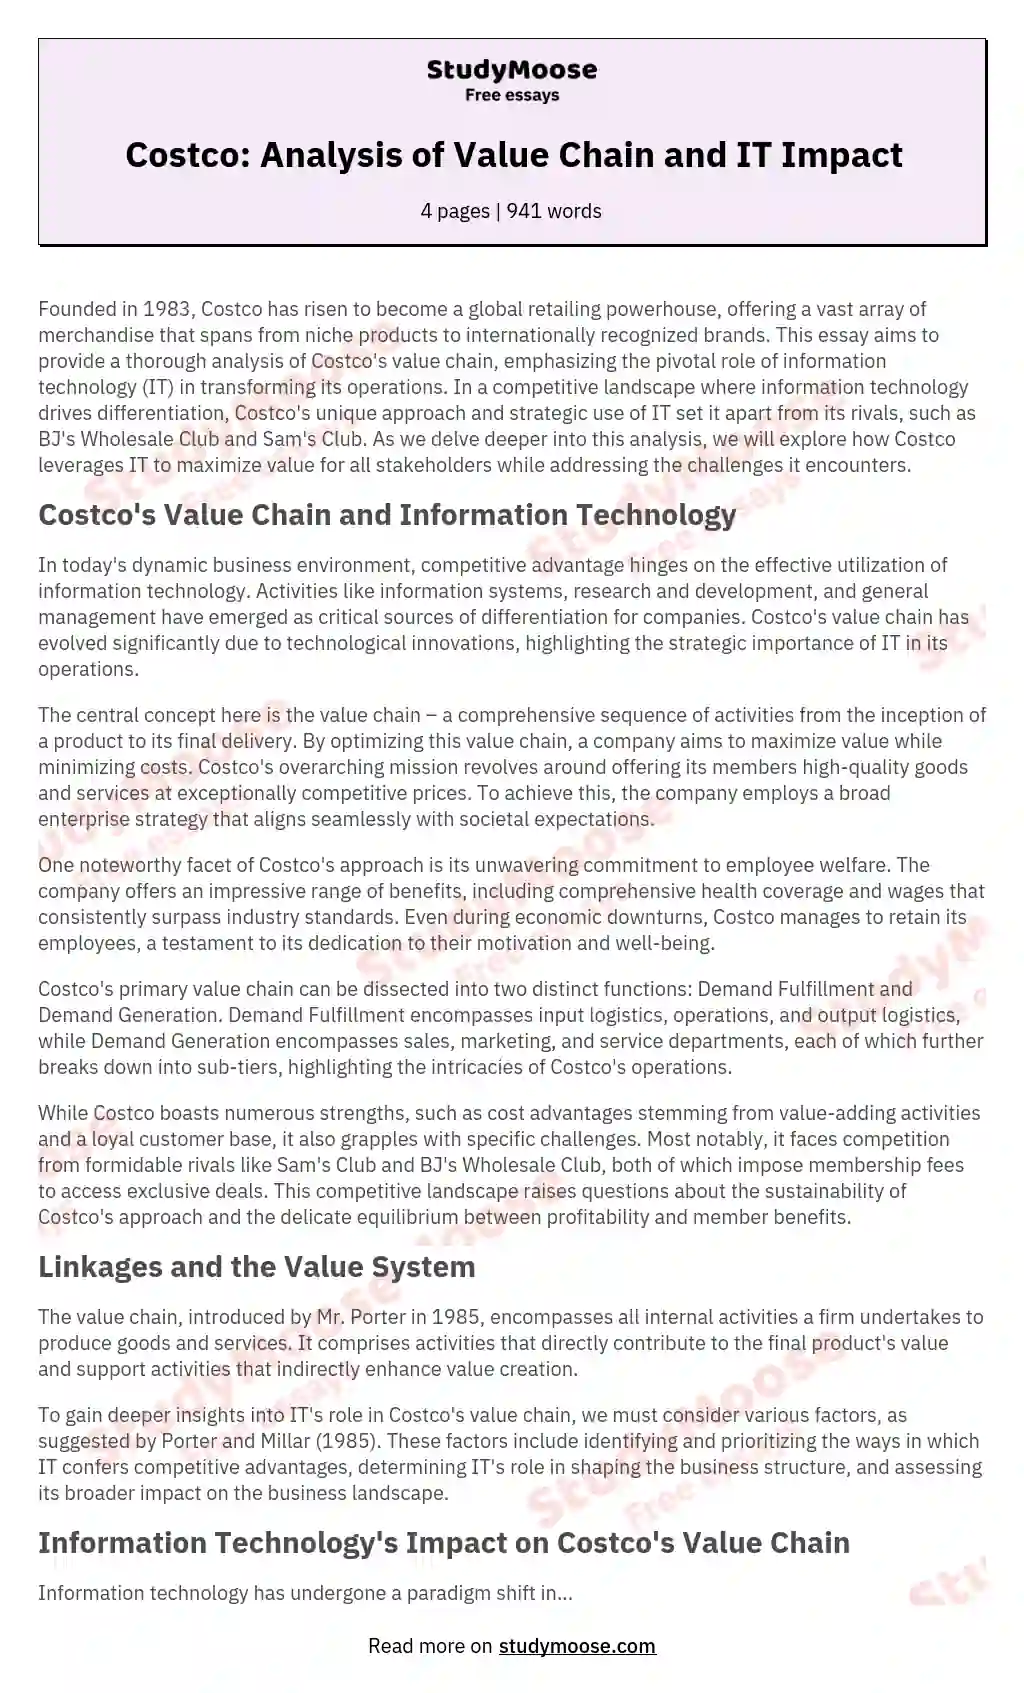 Costco: Analysis of Value Chain and IT Impact essay